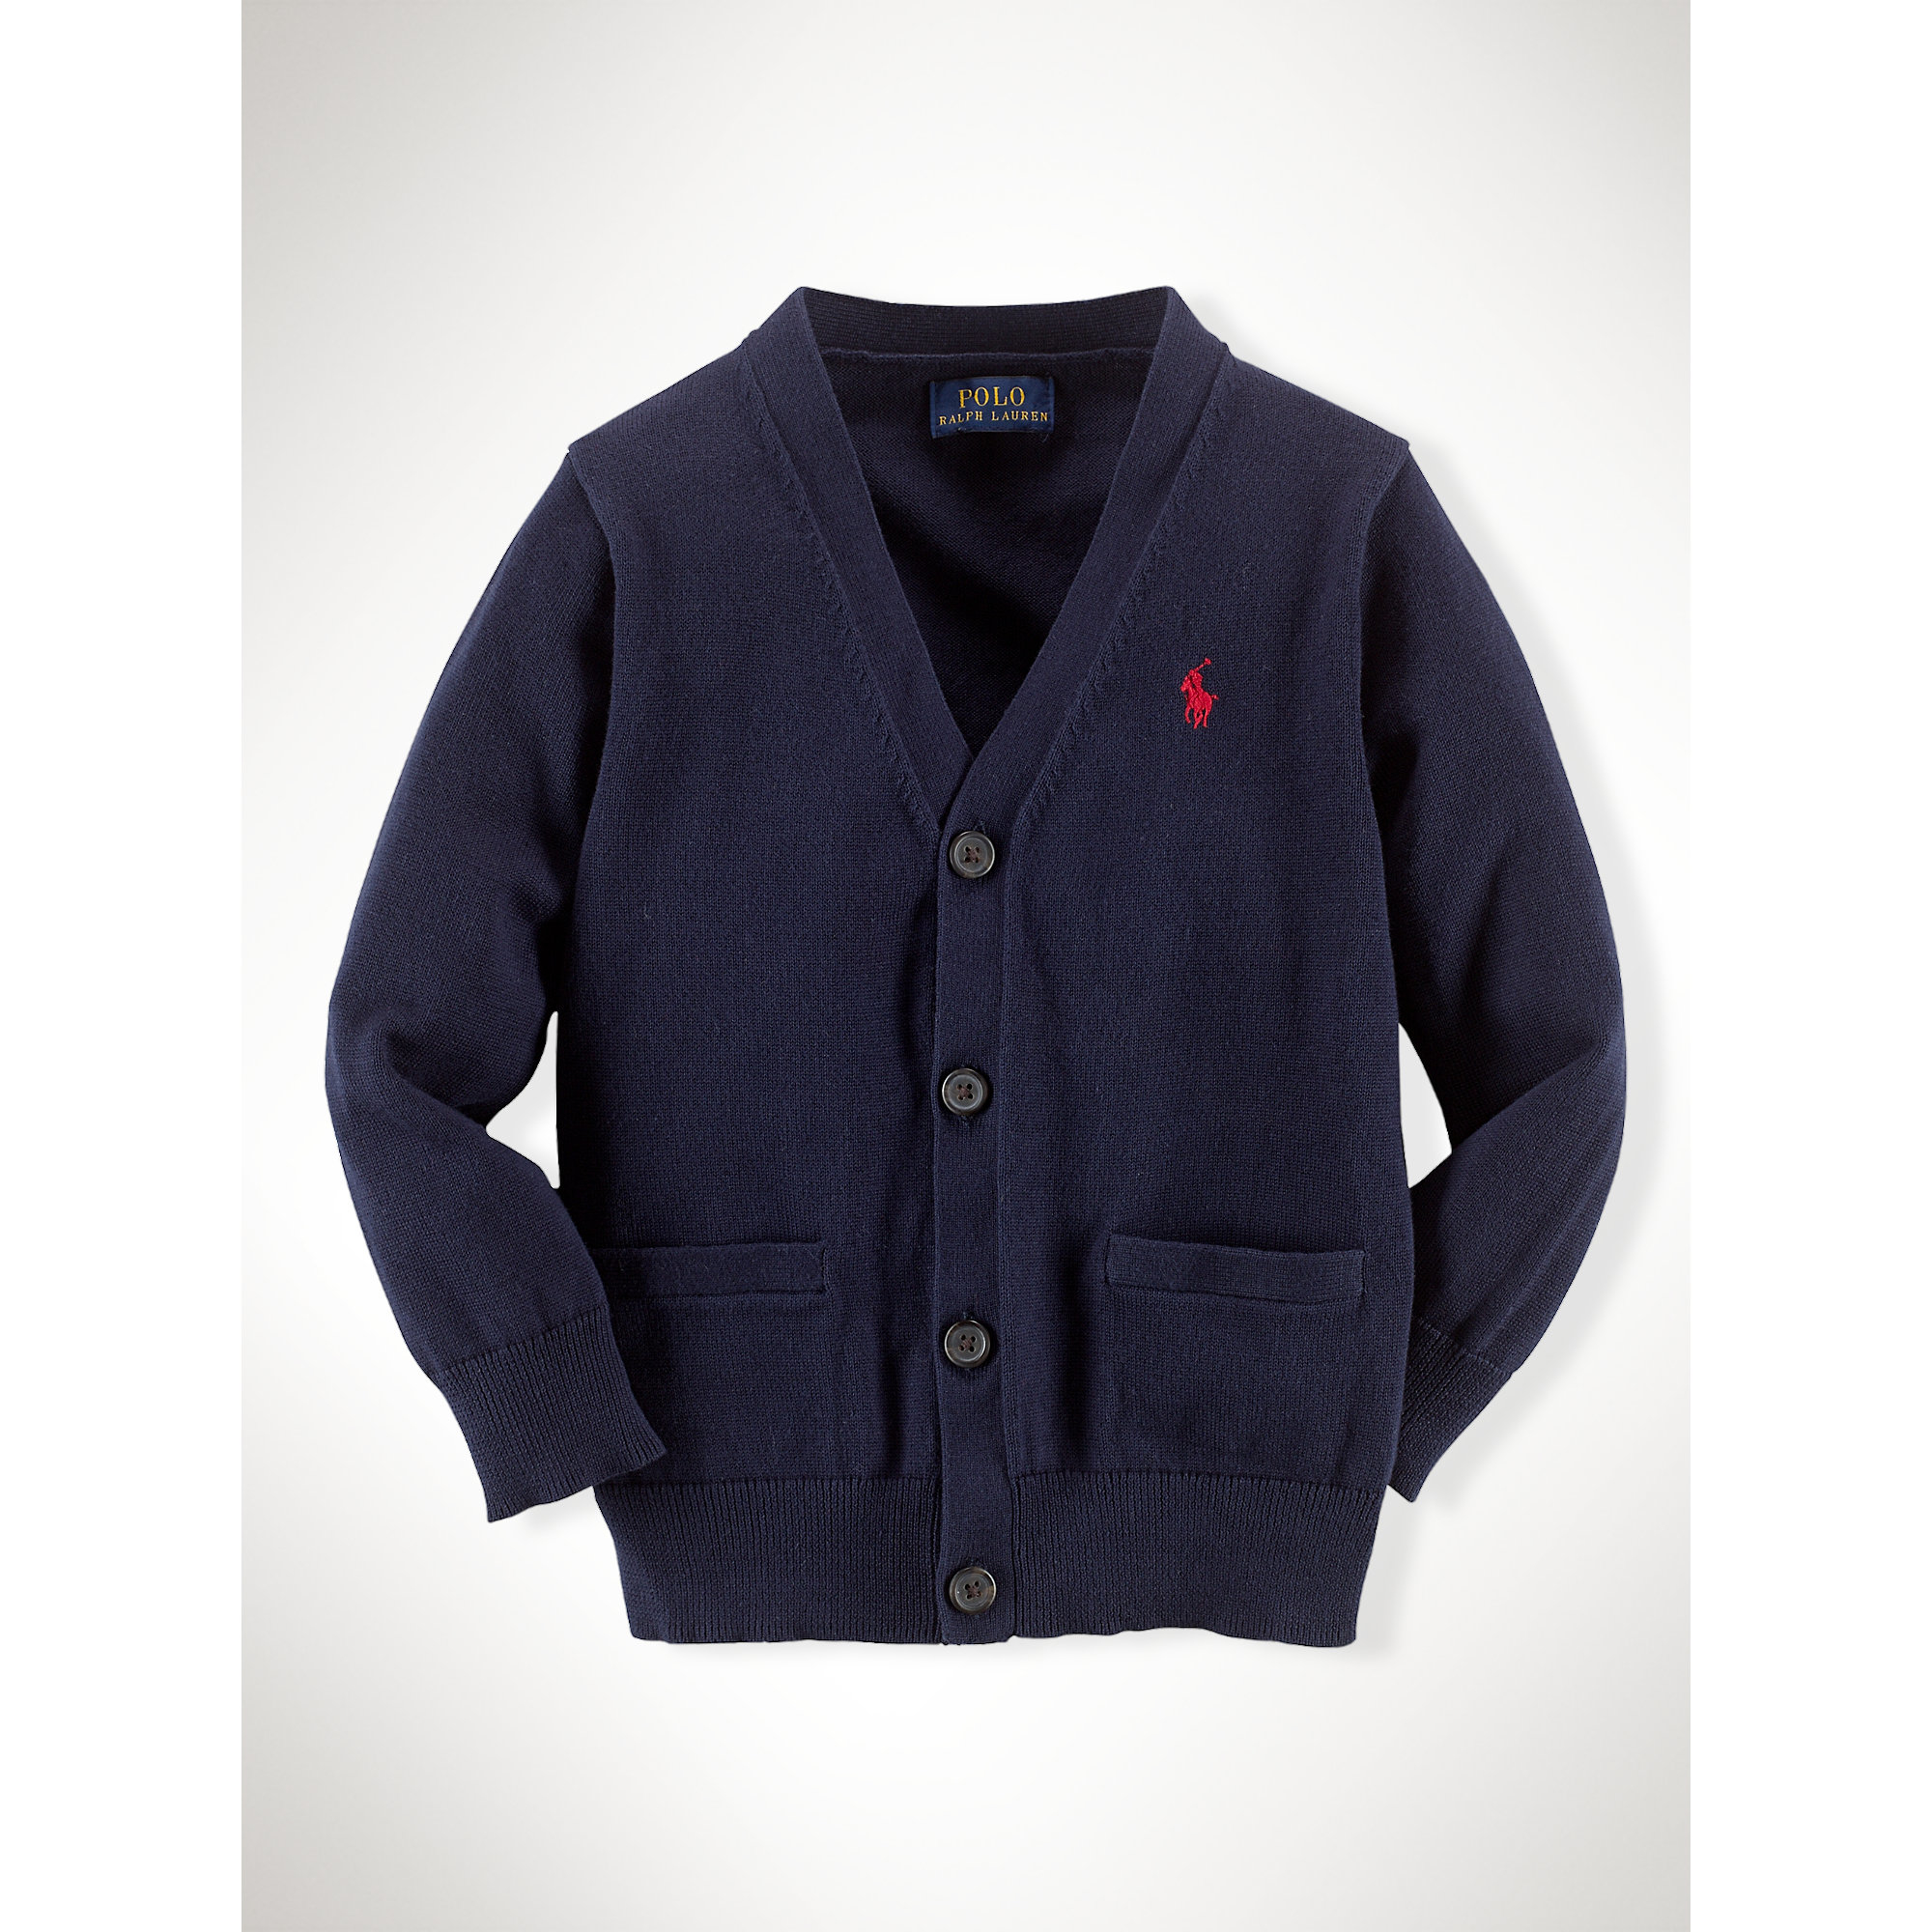 Ow Patch Cardigan in blue